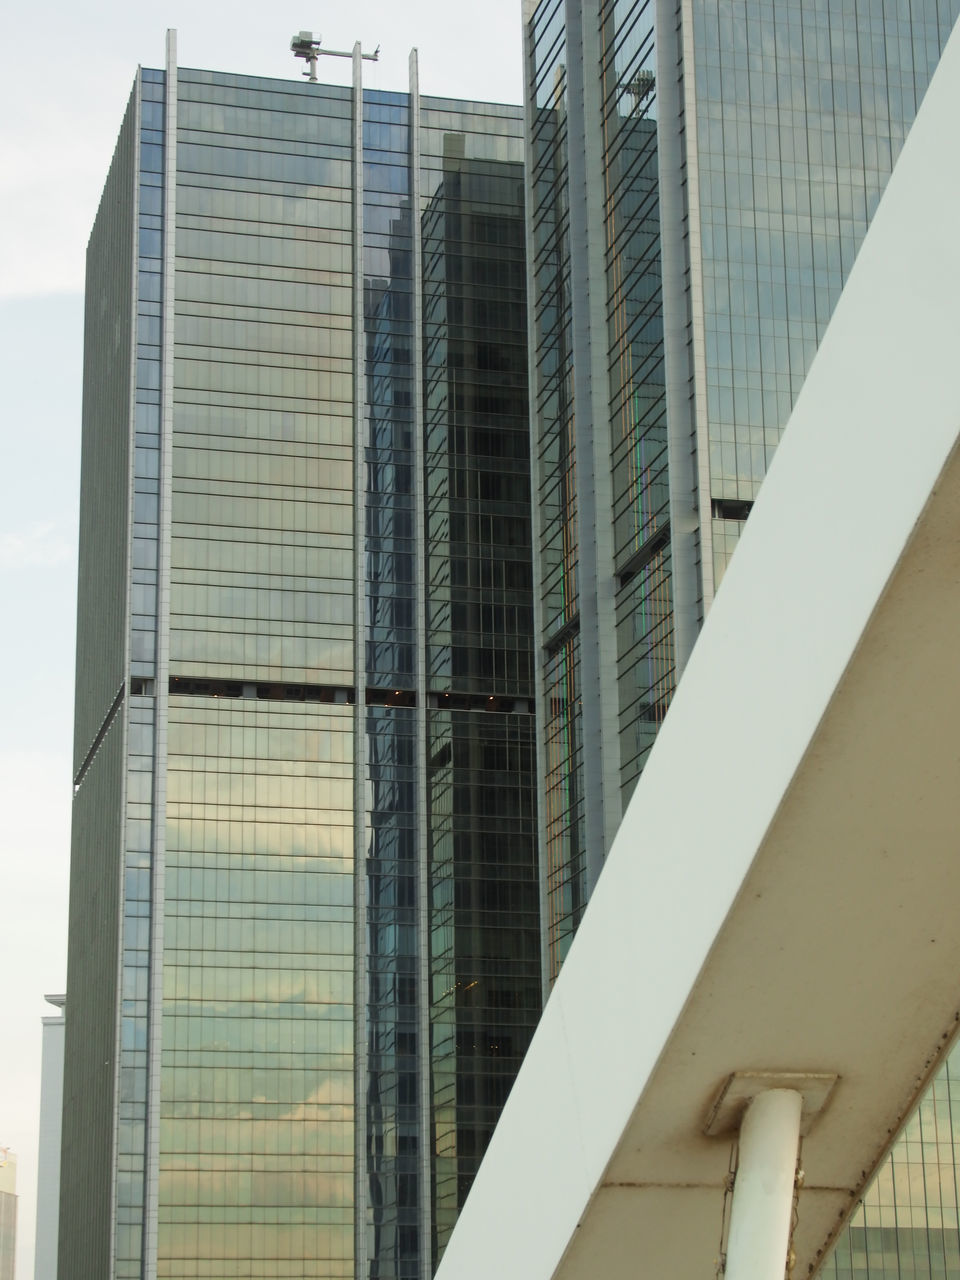 LOW ANGLE VIEW OF MODERN BUILDING